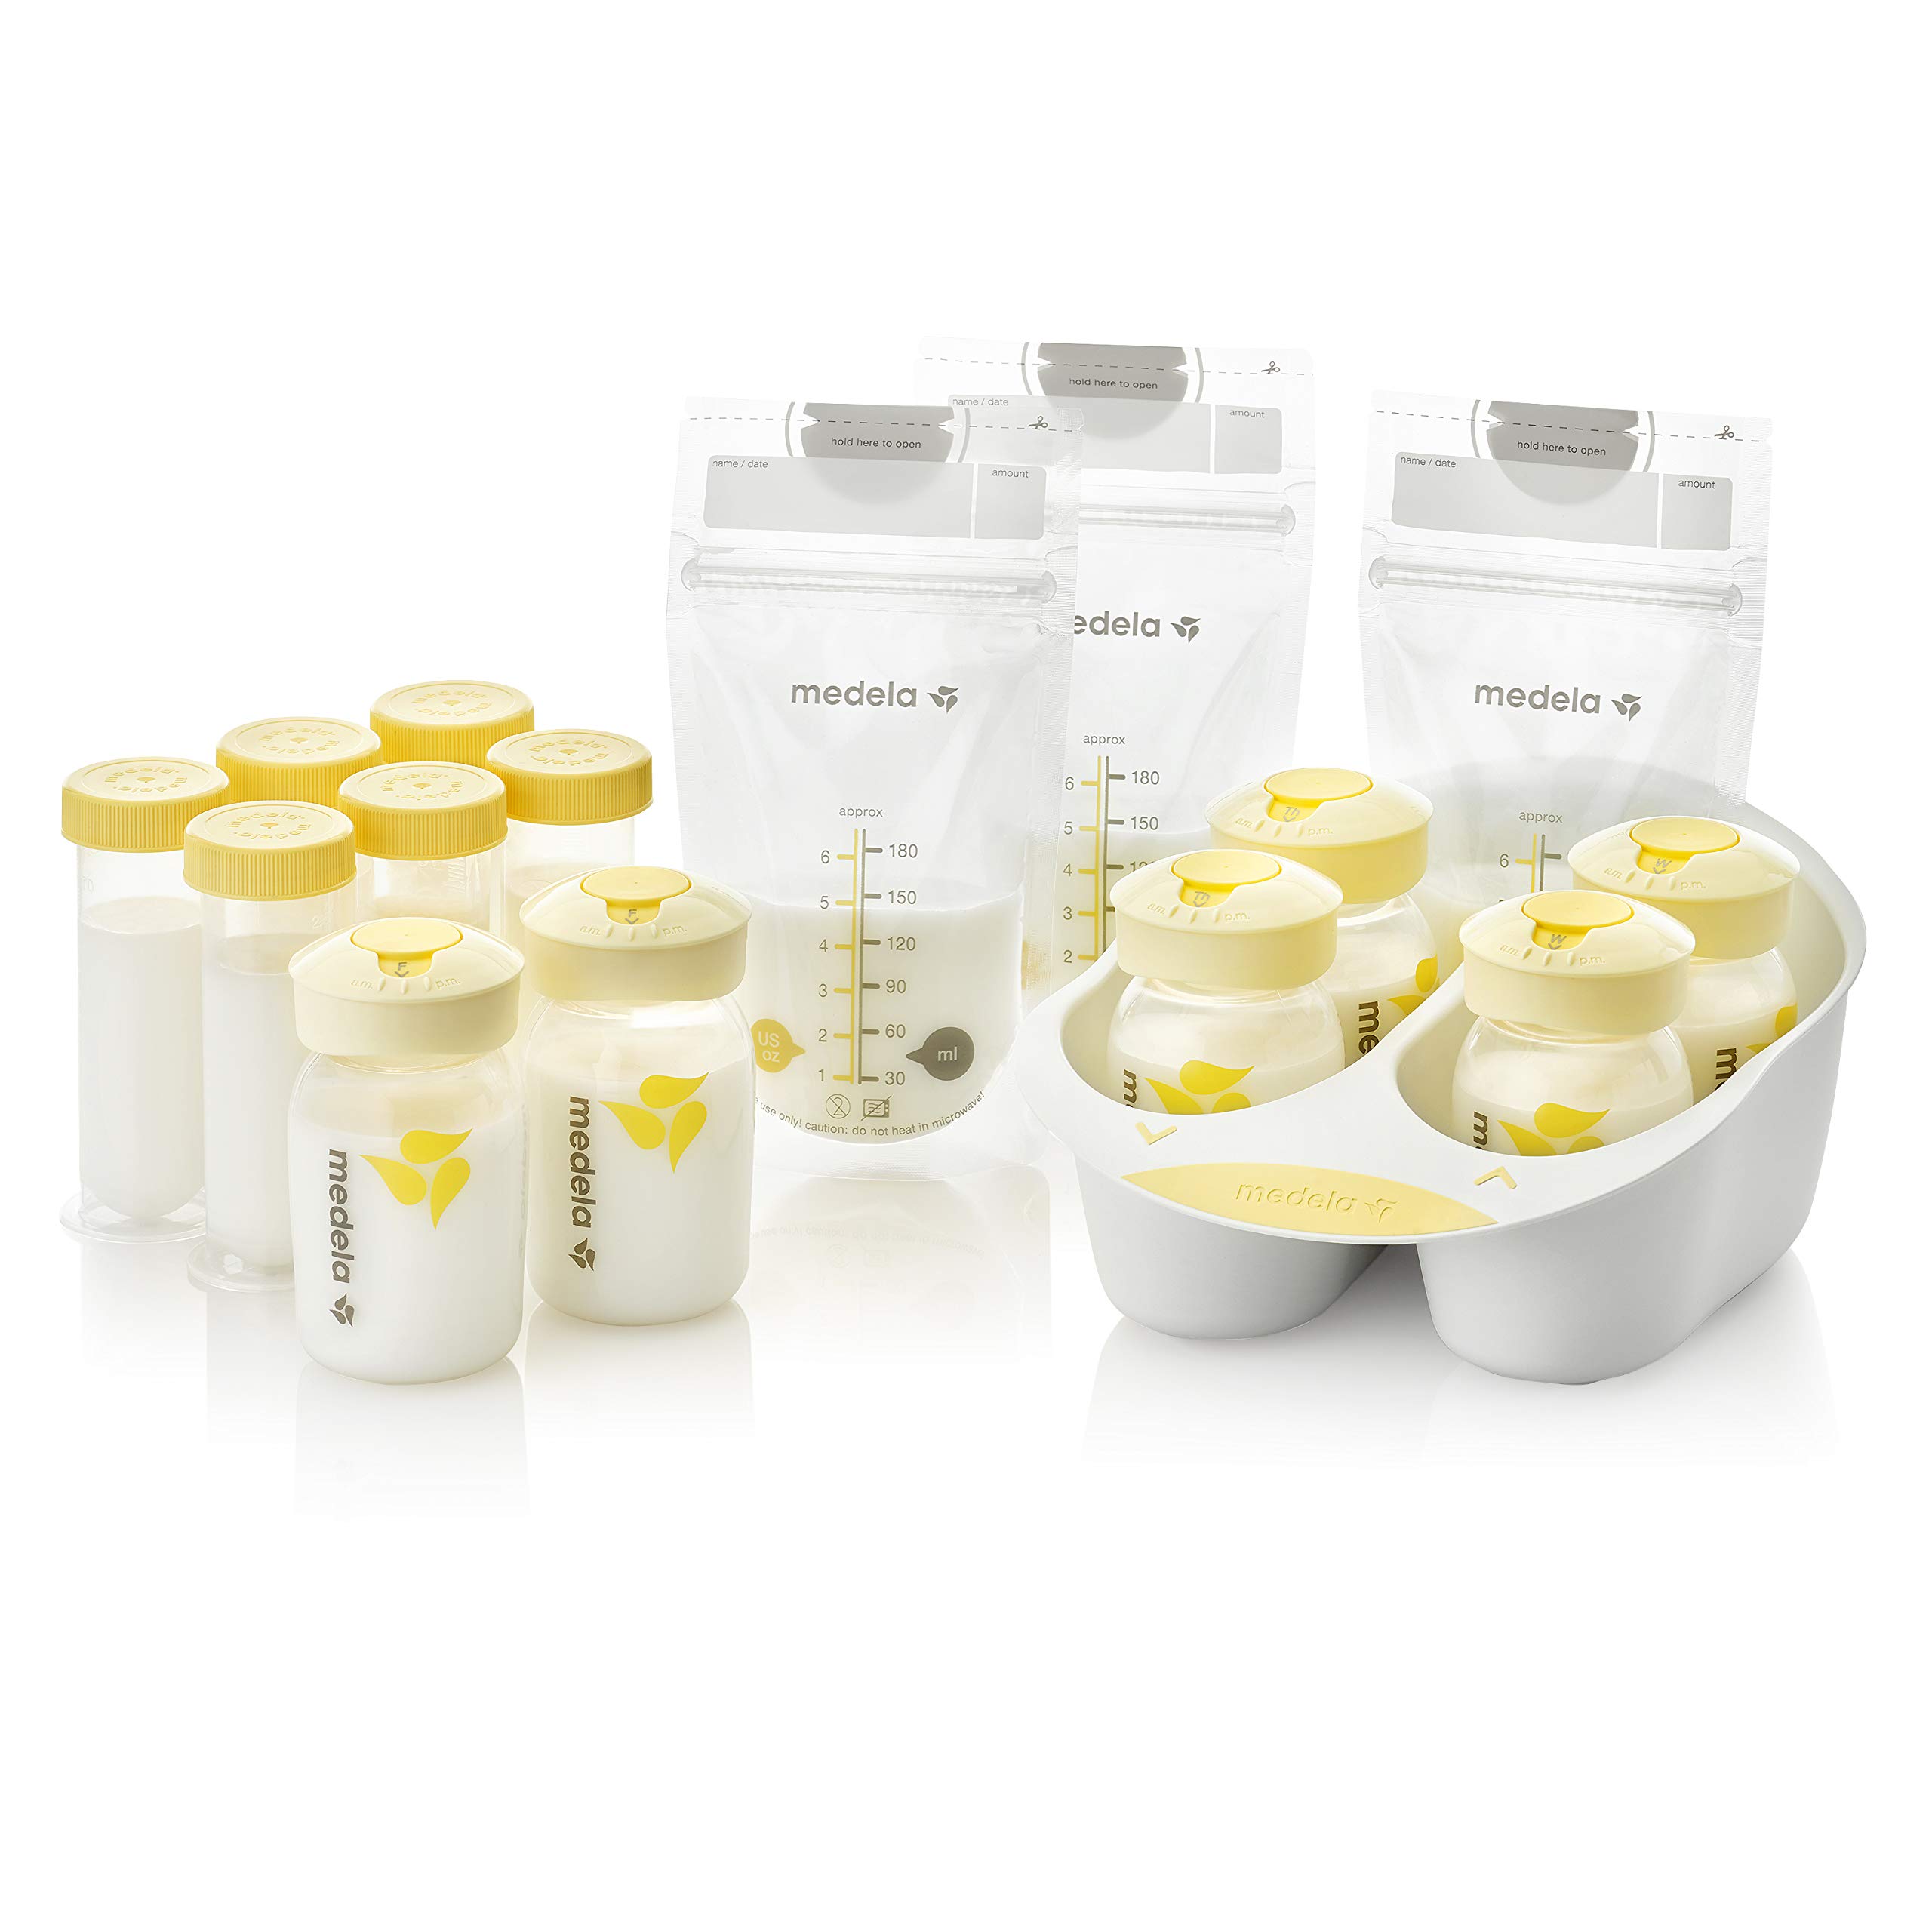 Medela Symphony Plus Breast Pump & Breast Milk Storage Solution Set, Breastfeeding Supplies & Containers, Breastmilk Organizer, Made Without BPA